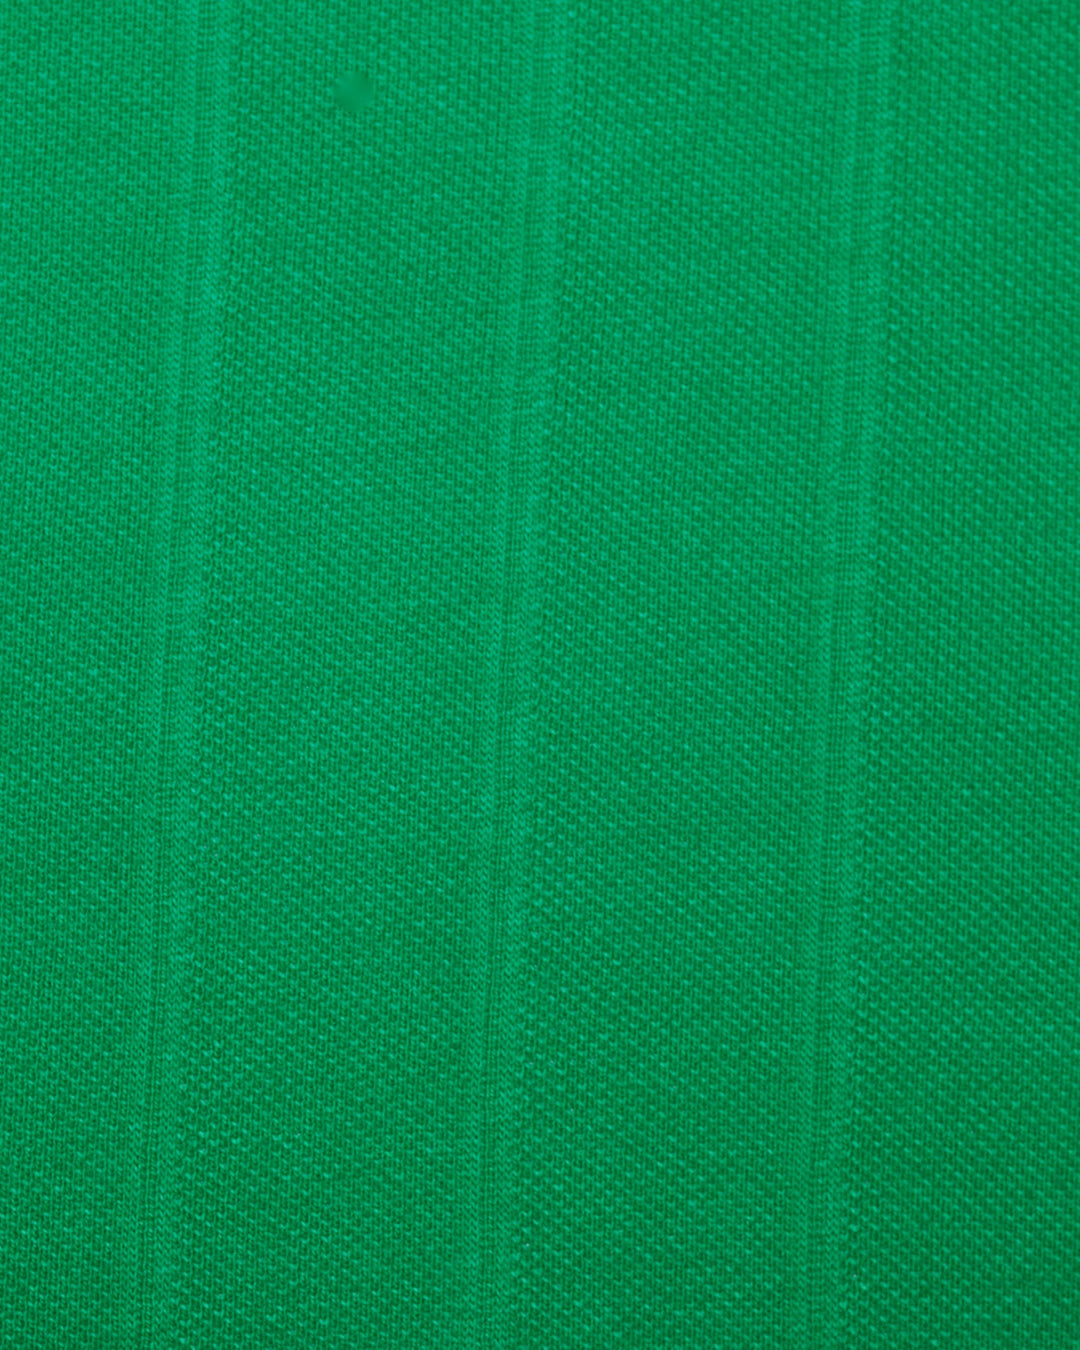 Green With Self Stripes T-shirt